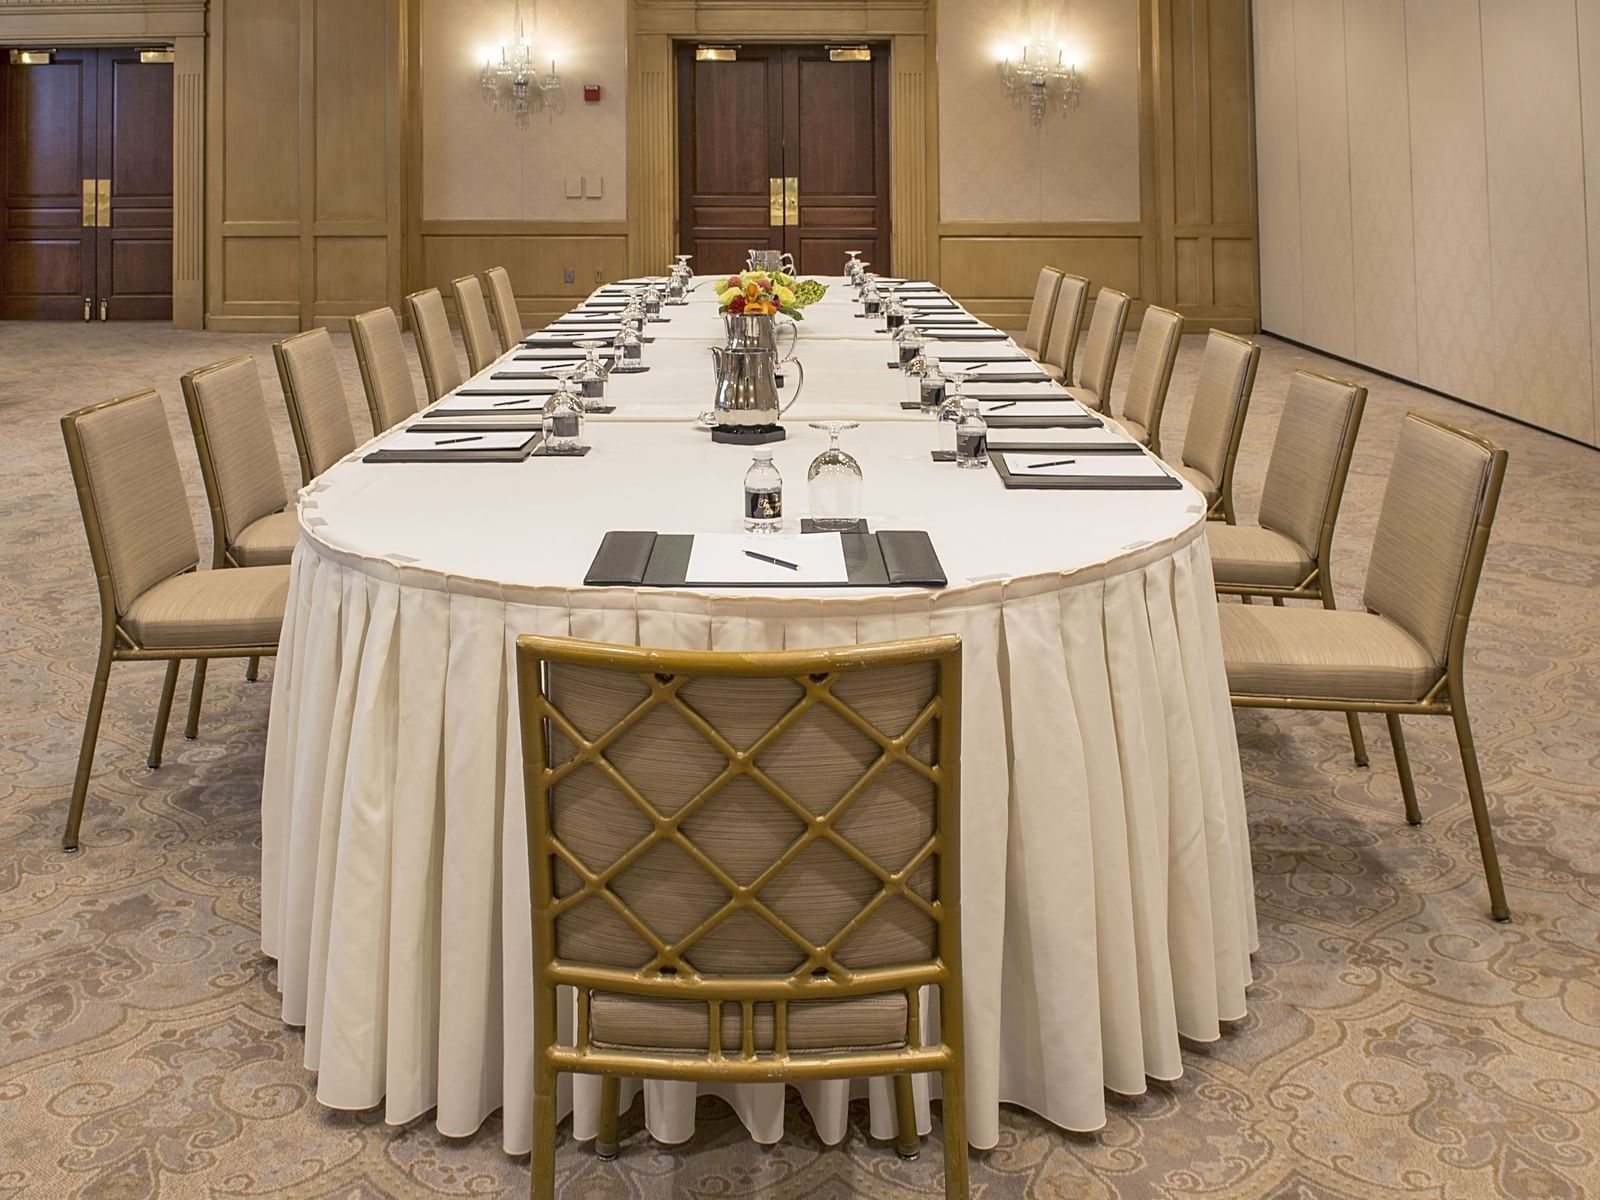 Conference table arrangements in Salon II at The Townsend Hotel